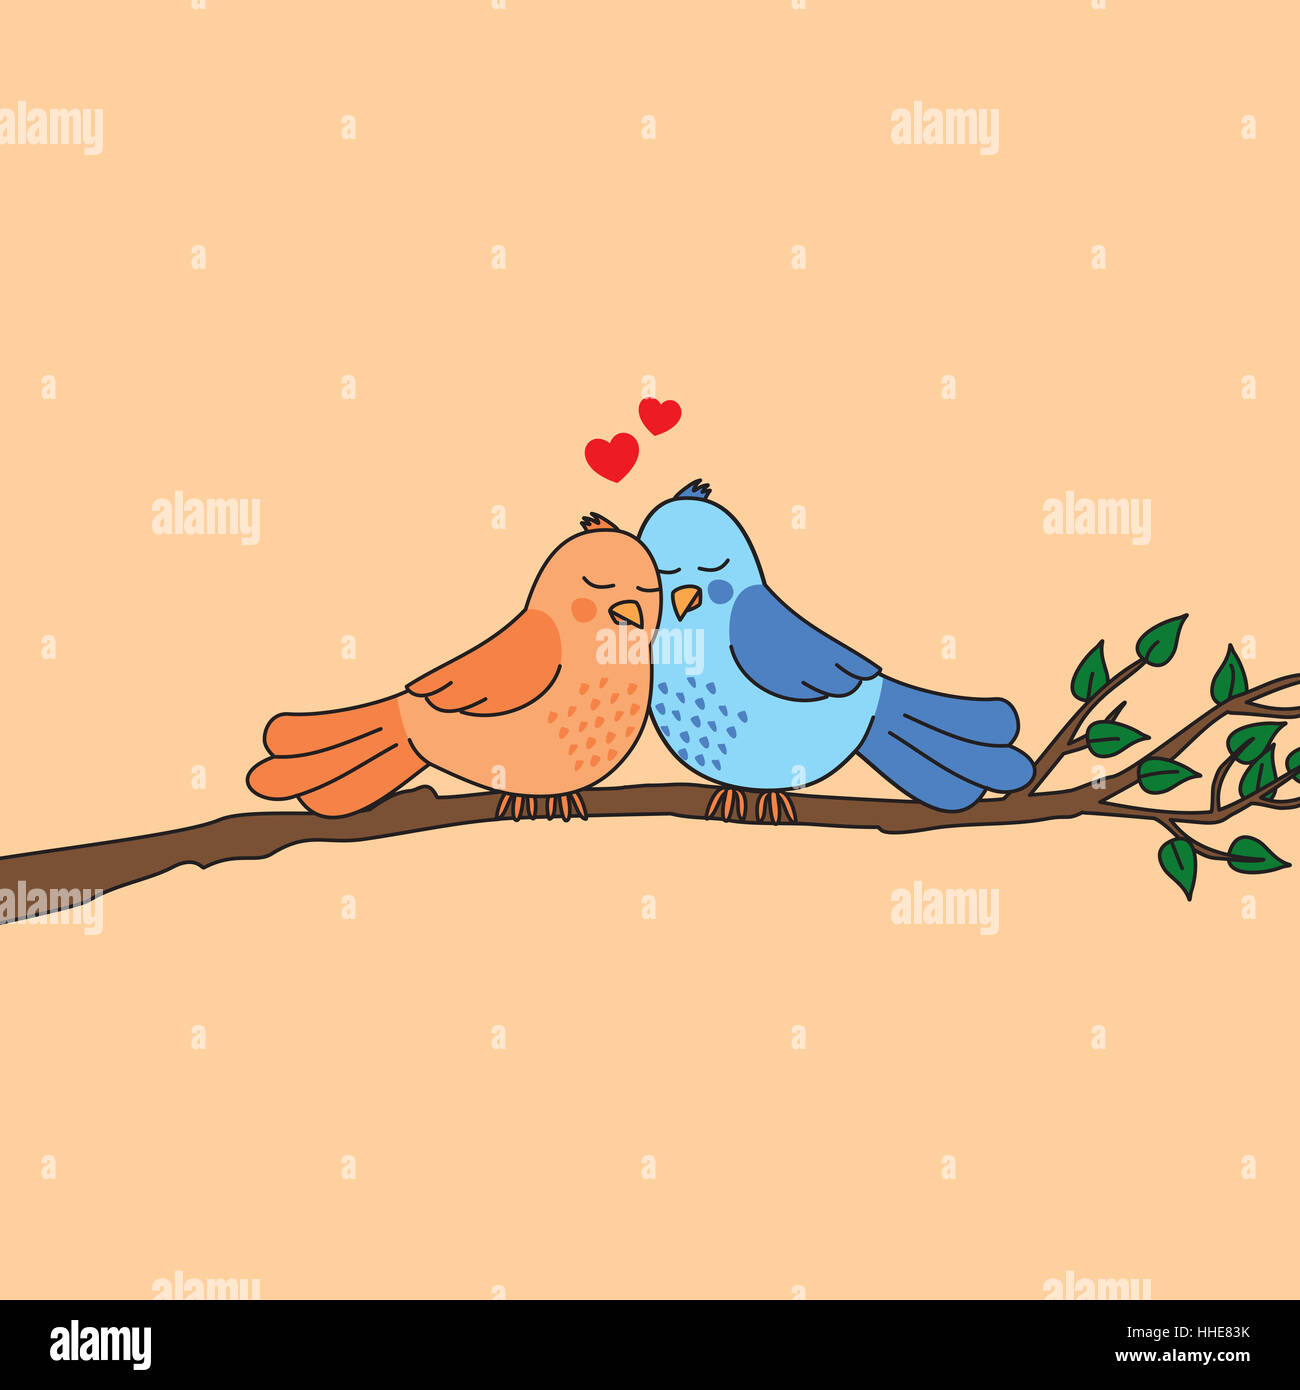 Valentine's Day greeting card with two cute cartoon love birds ...